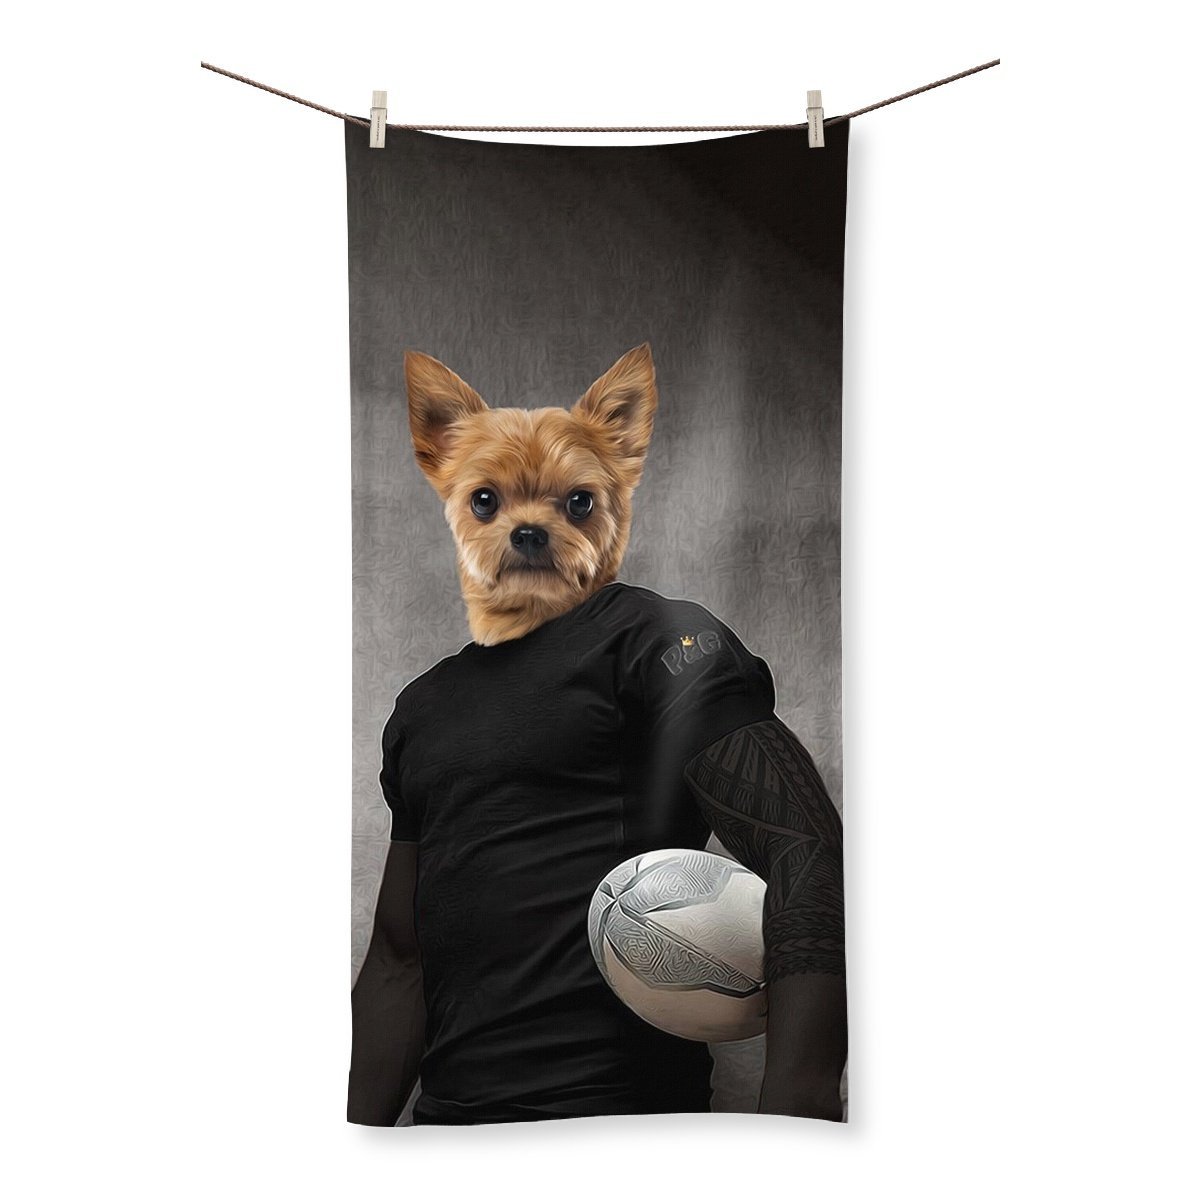 The Rugby Player: Custom Pet Towel - Paw & Glory - #pet portraits# - #dog portraits# - #pet portraits uk#Paw & Glory, pawandglory, aristocrat dog painting, in home pet photography, pet portraits black and white, renaissance cat portrait, dog portrait painting, aristocrat dog painting, pet portrait,pet portraits Towel